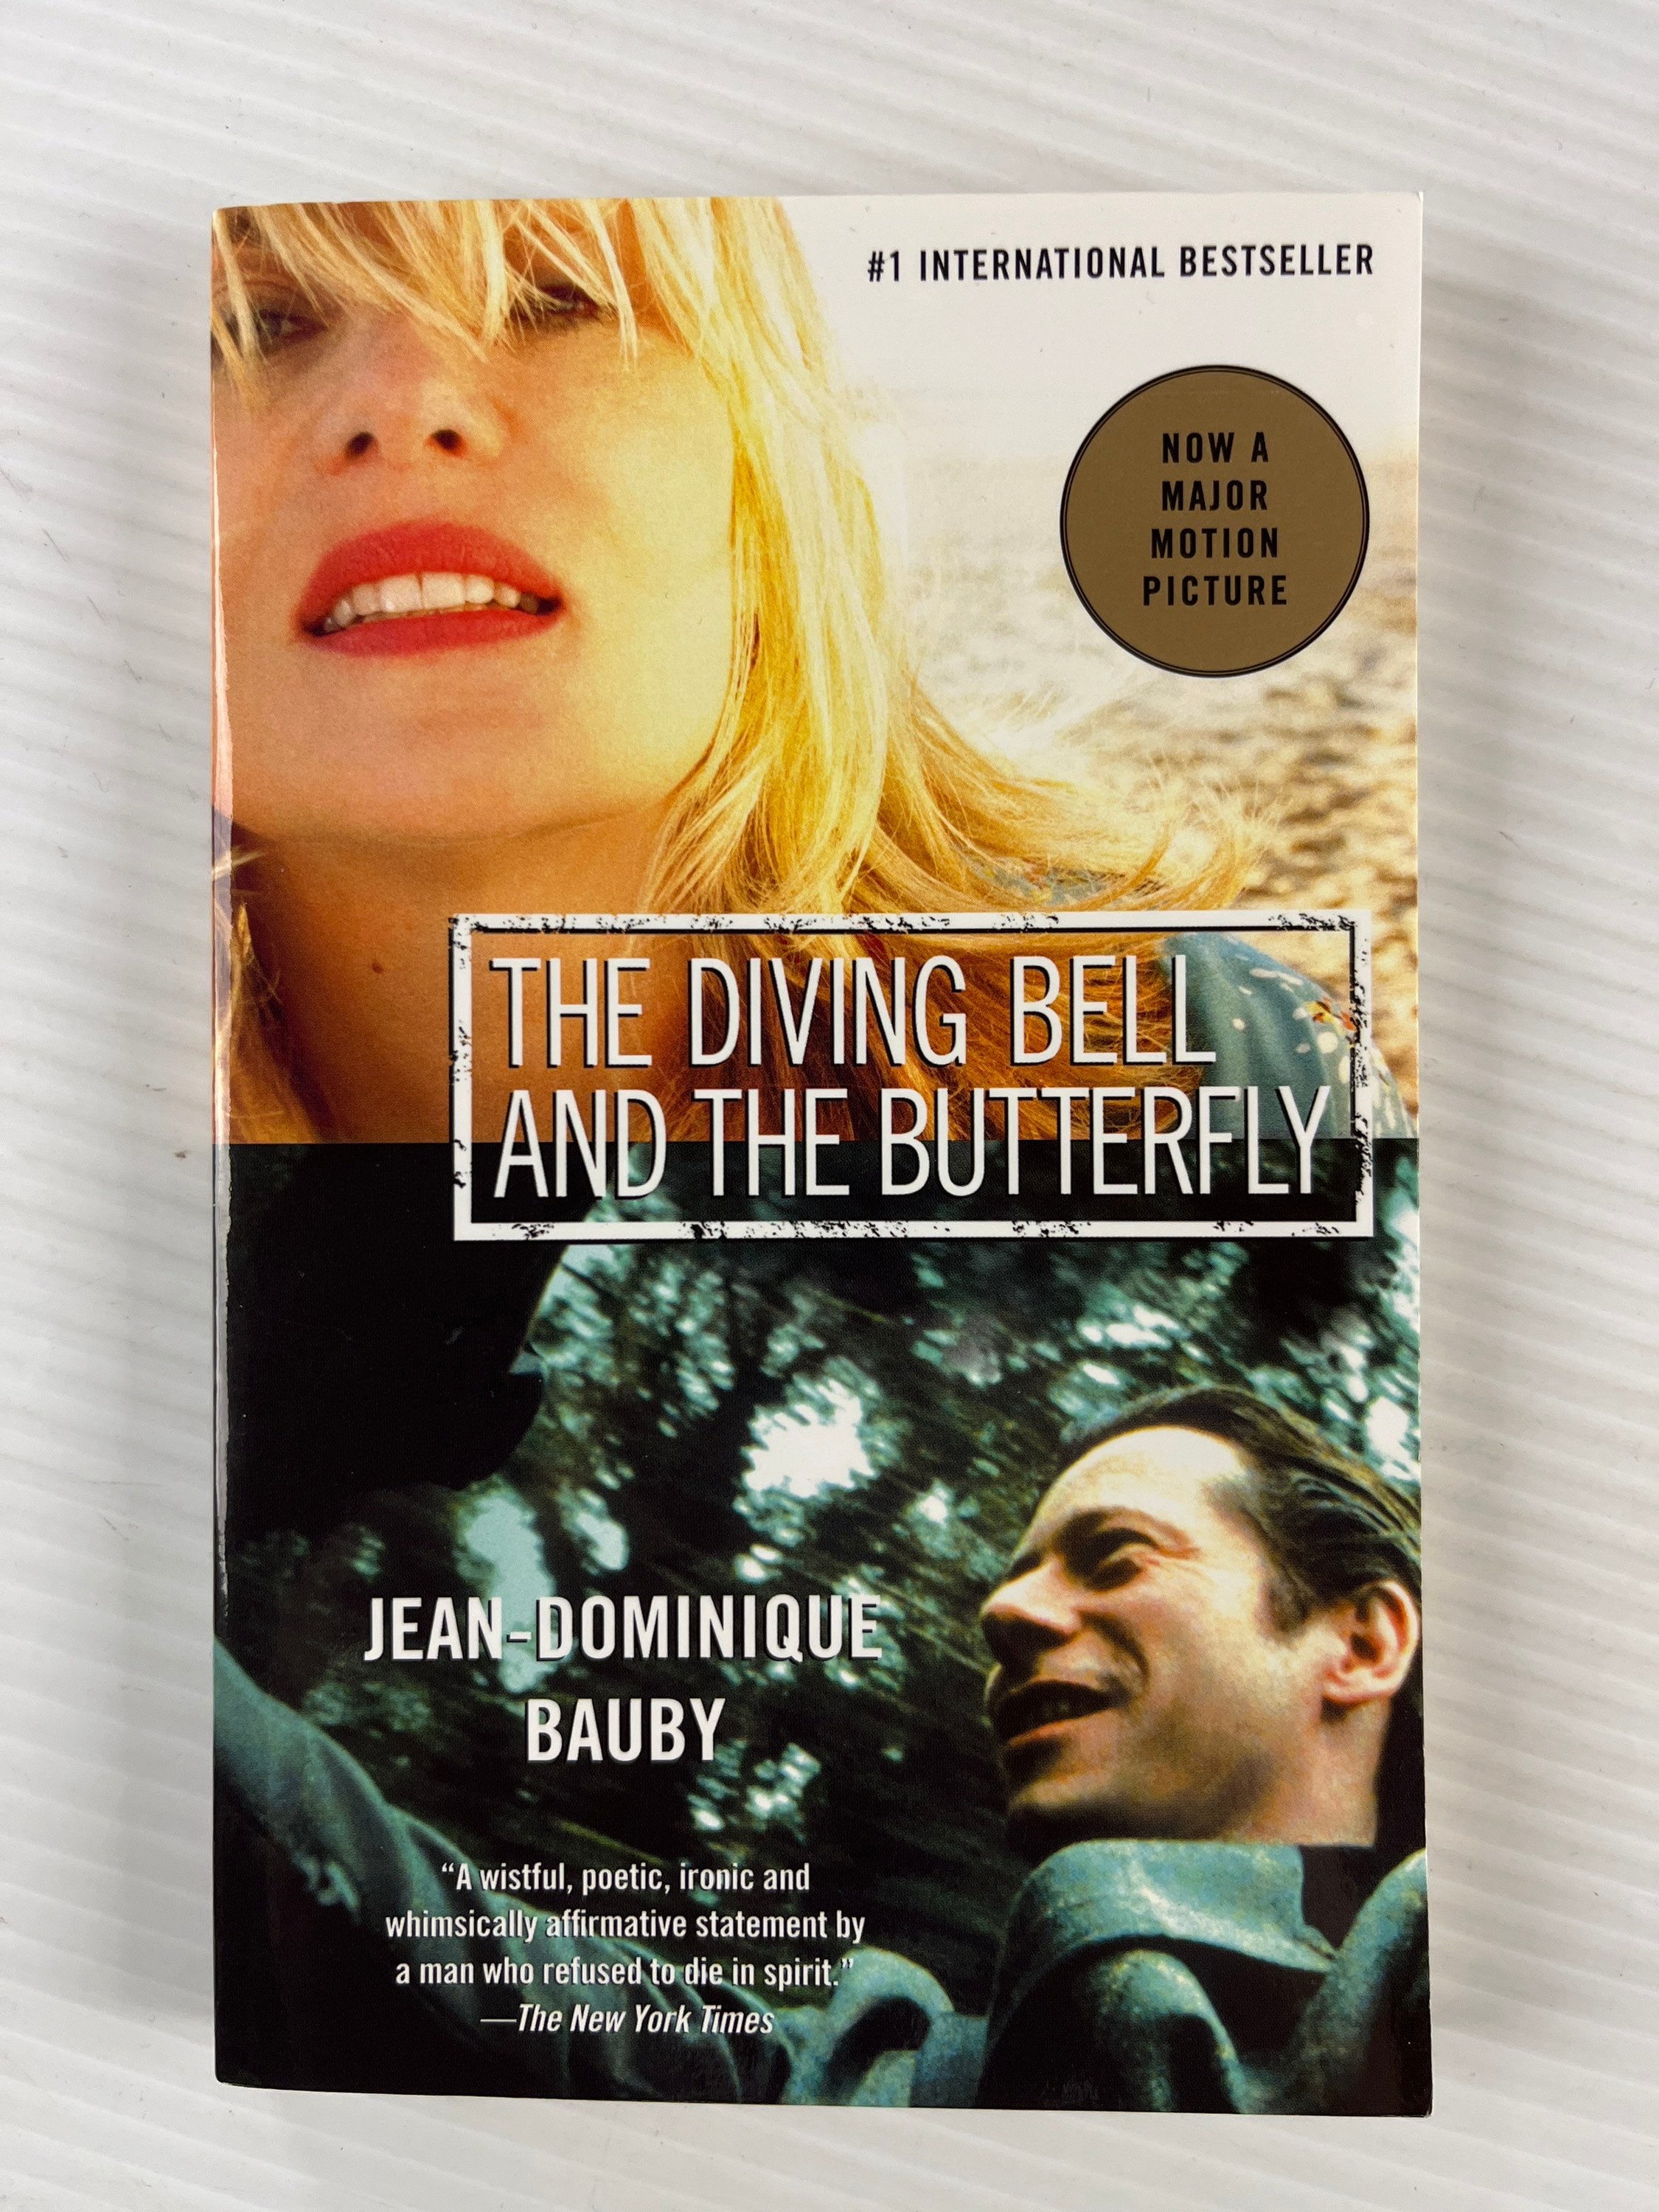 Torture Or Freedom? | The Diving-Bell And The Butterfly (Jean-Dominique  Bauby) - YouTube